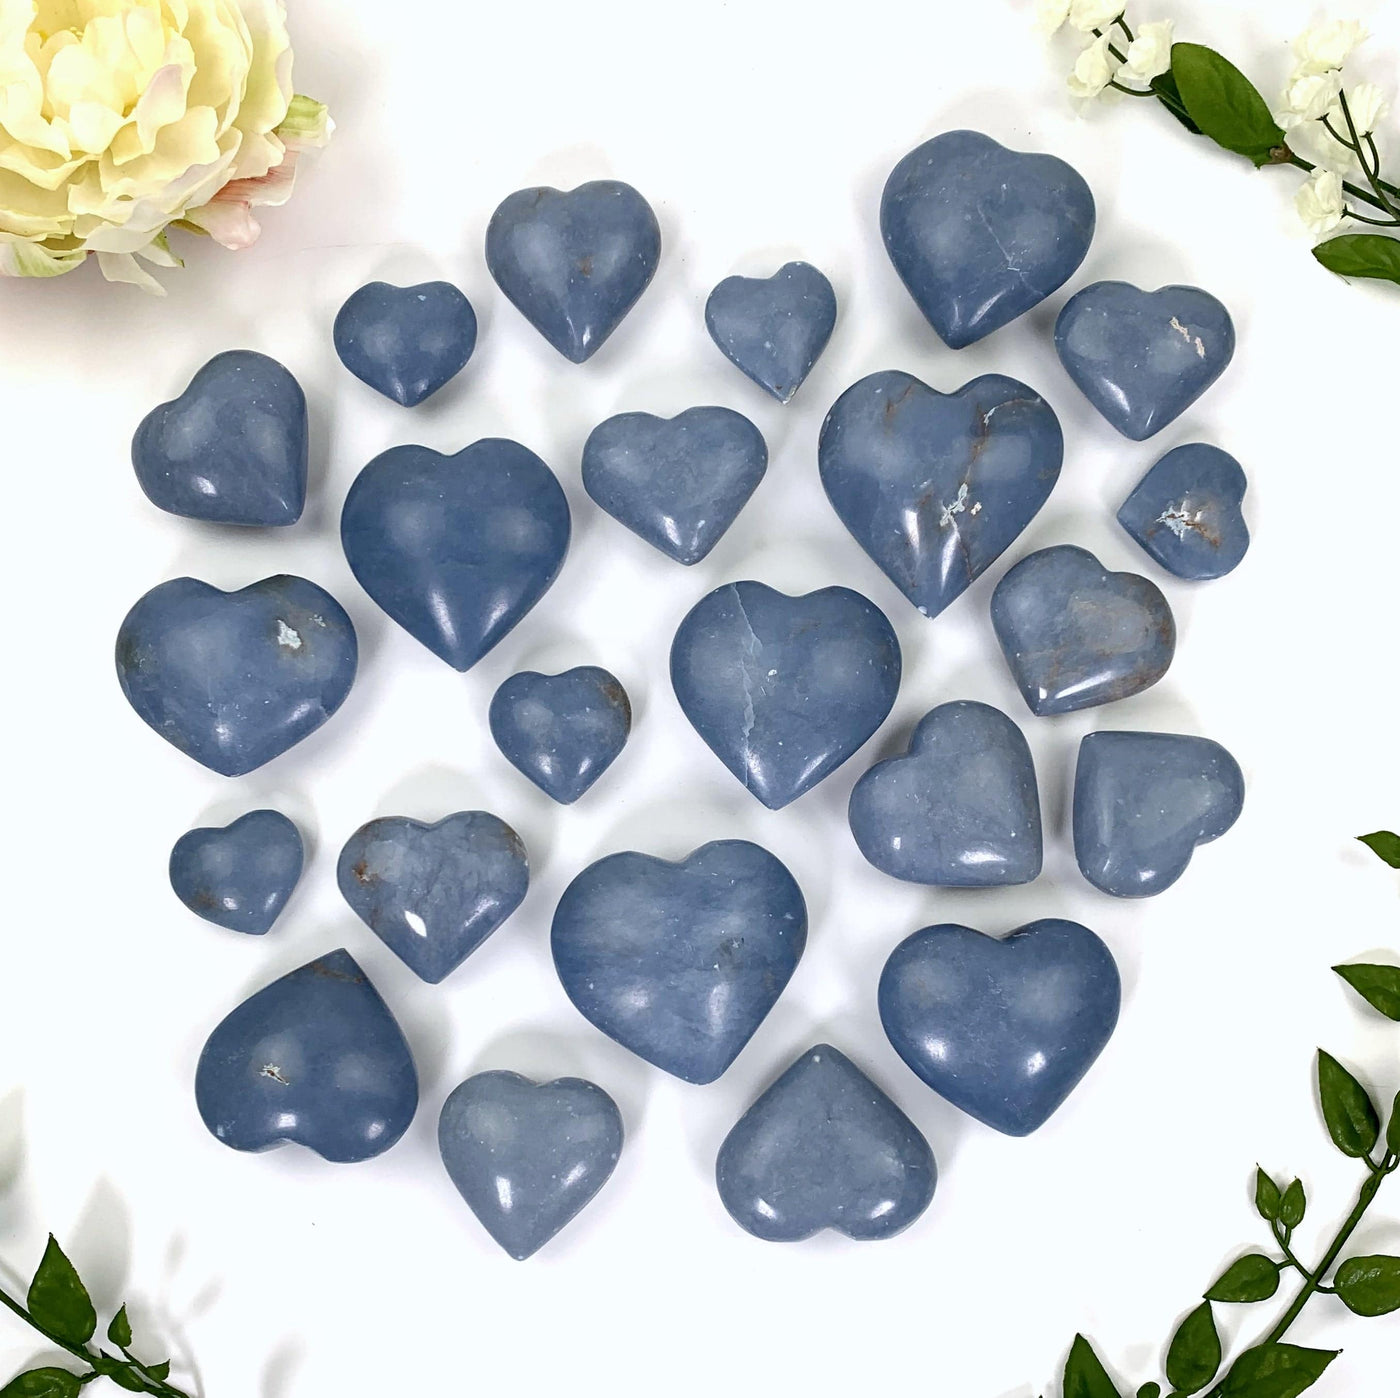 a multitude of light blue angelite hearts on a white background surrounded by flowers